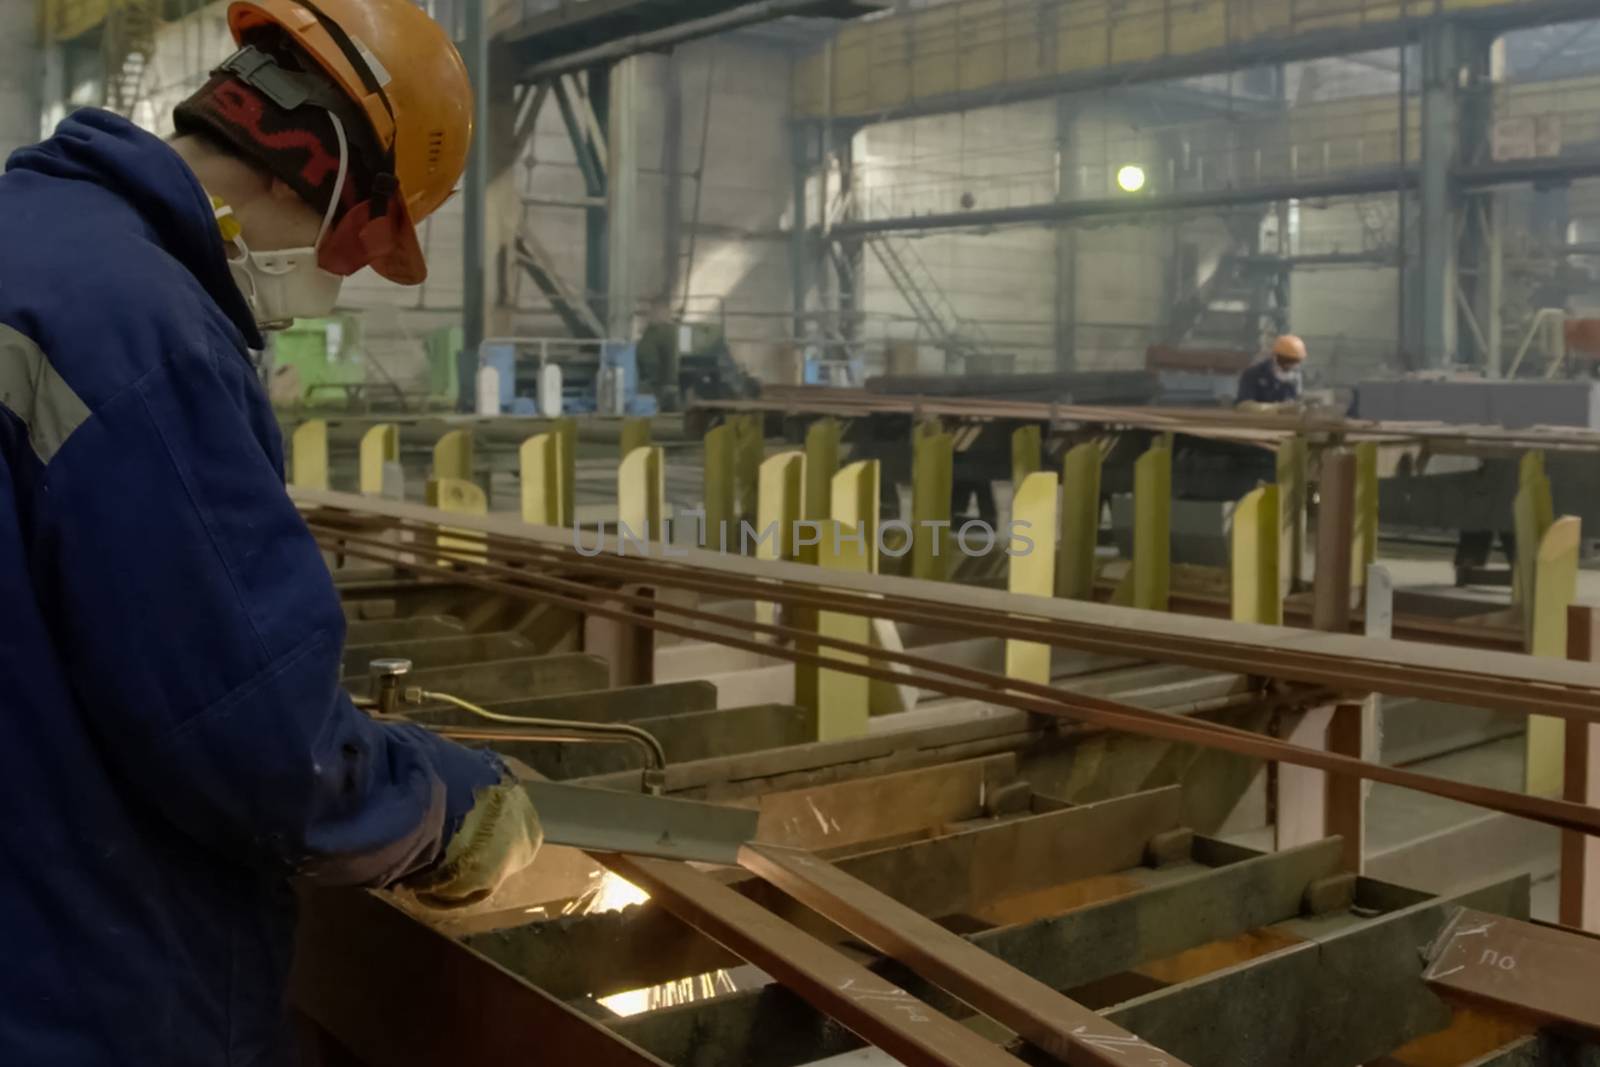 Novorossiysk, Russia - May 26, 2018: Shipbuilding plant, The welder cuts the metal with gas welding.